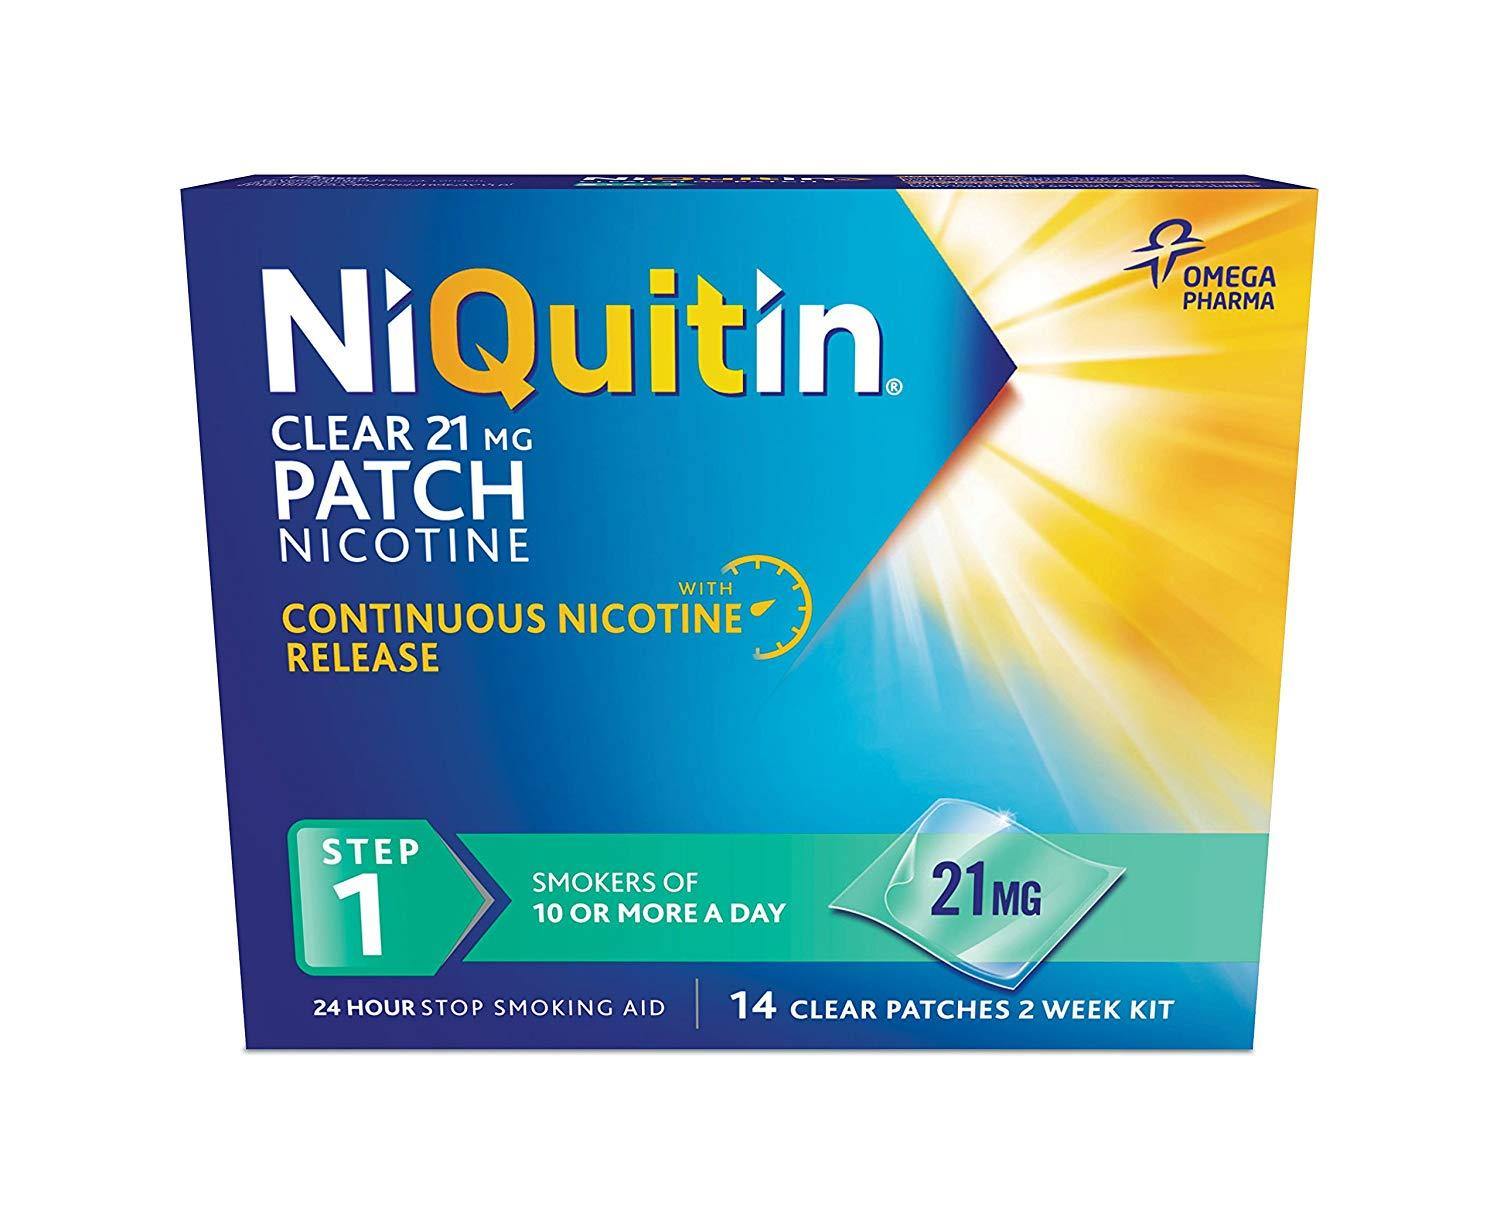 NIQUITIN 4 MG. Nicabate антитникотин. Do expired Nicotine Patches still work. Clear mg